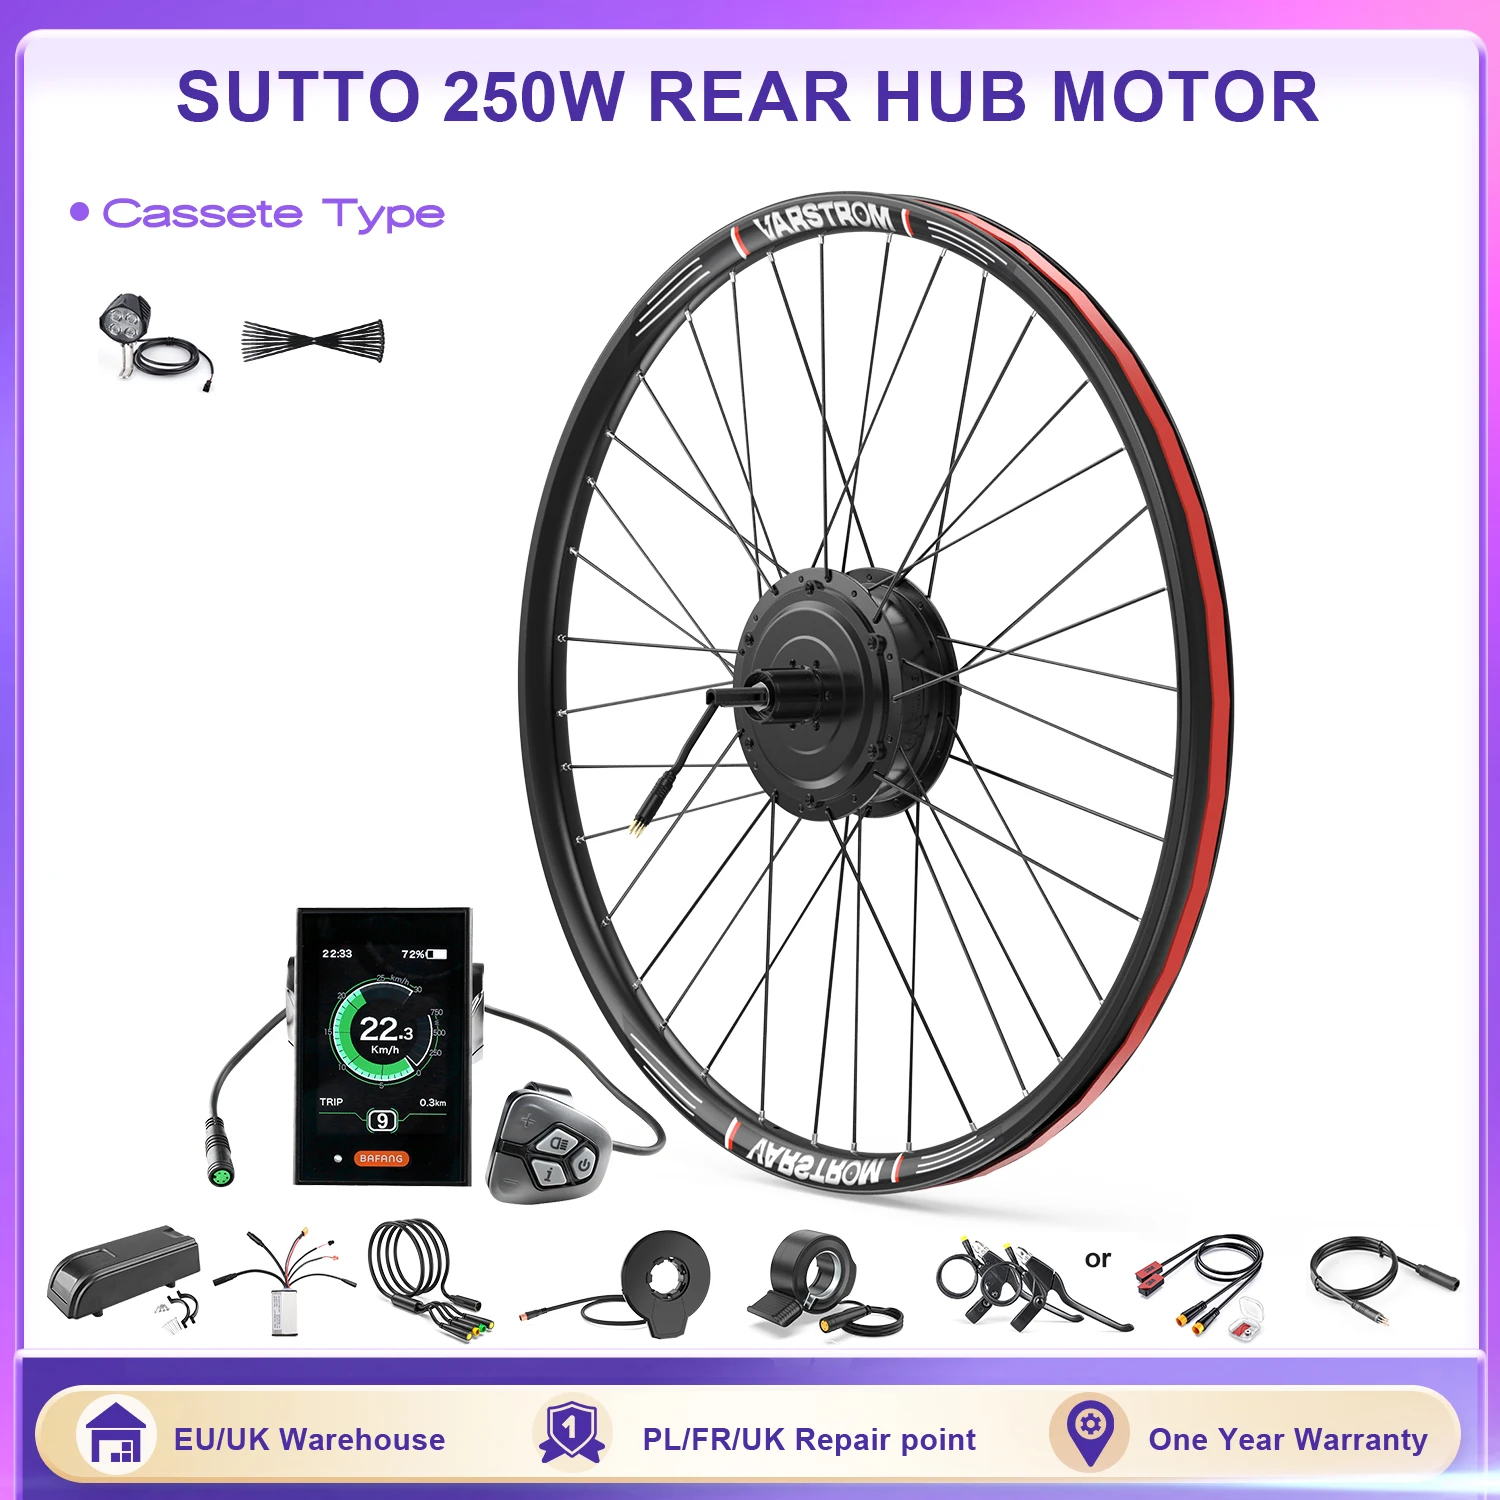 SUTTO 250W Rear Wheel Motor Kit Electric Bicycle Conversion Kits 36V Hub Motor Kit For Cassette Type Disc Brake With LCD Display